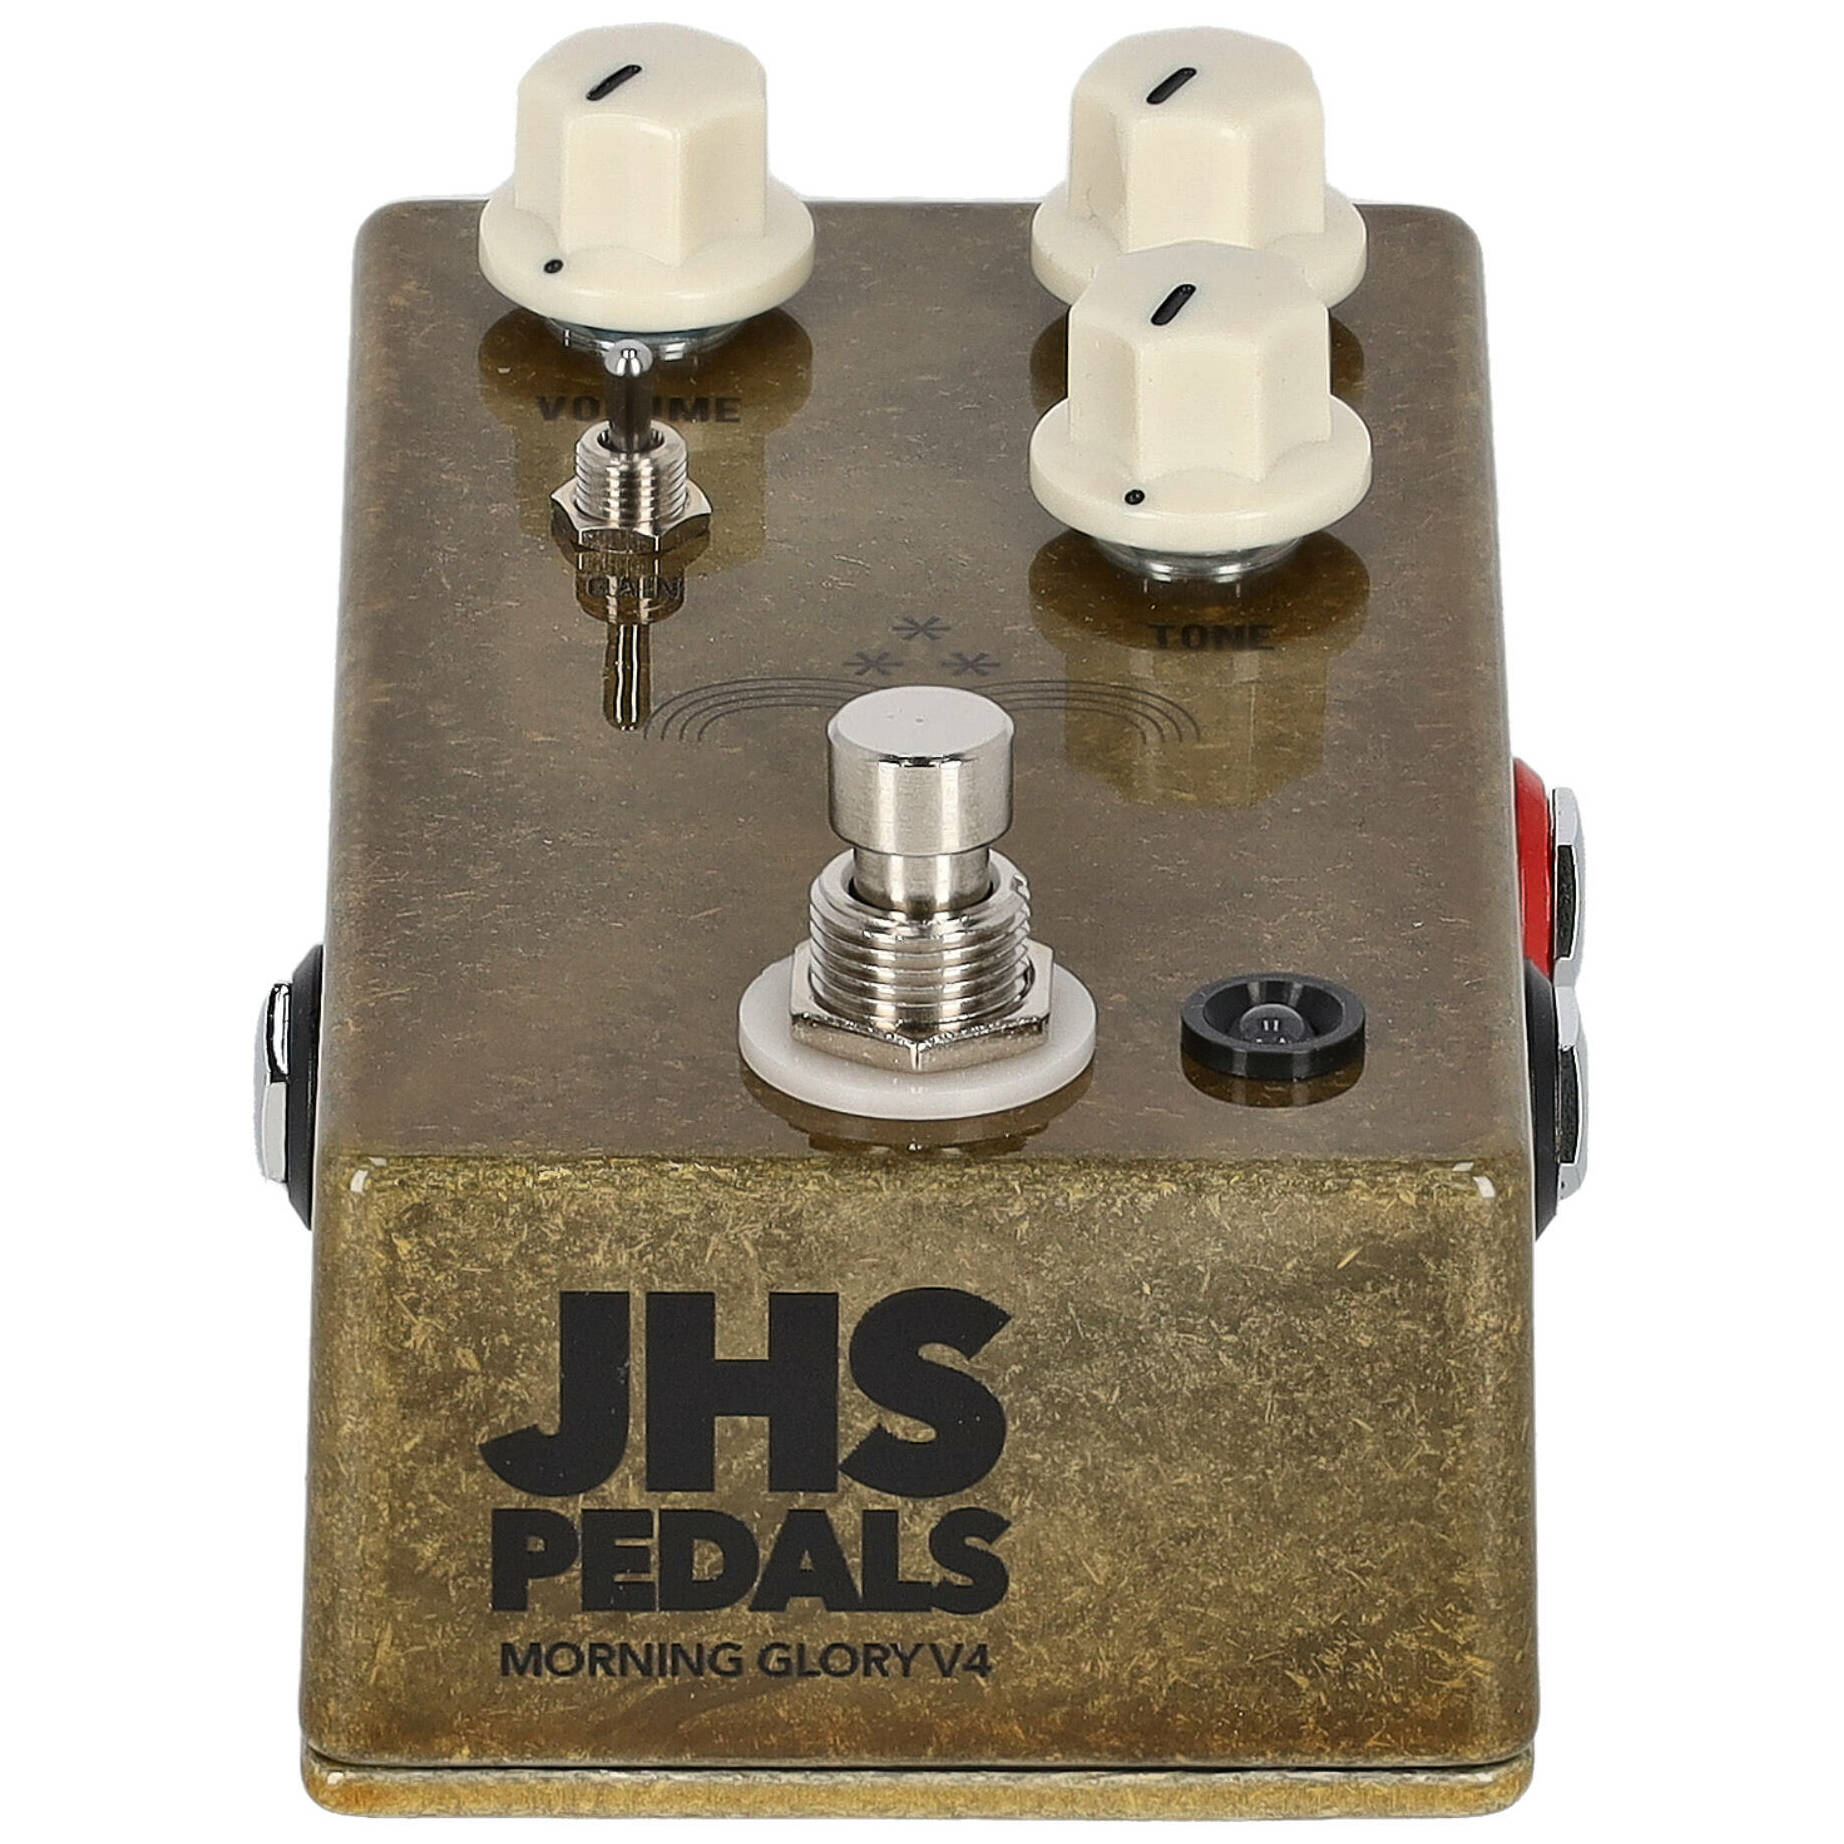 JHS Pedals Morning Glory V4 - Overdrive 1